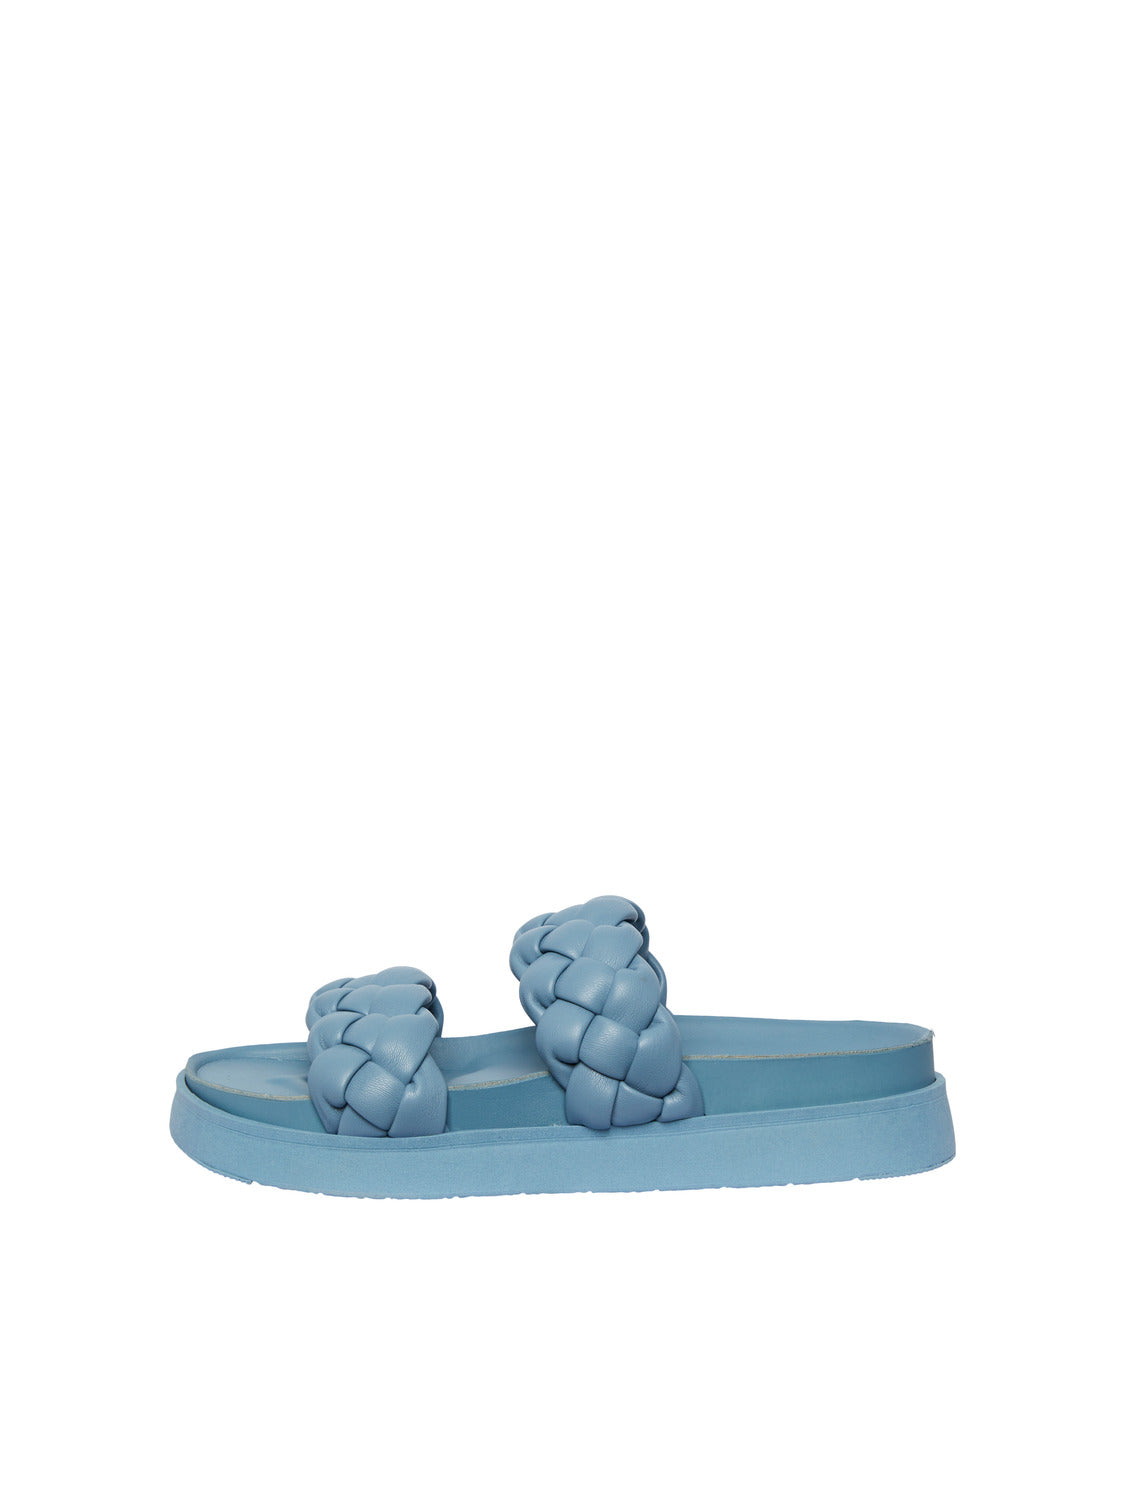 PCLAURA Sandals - Airy Blue